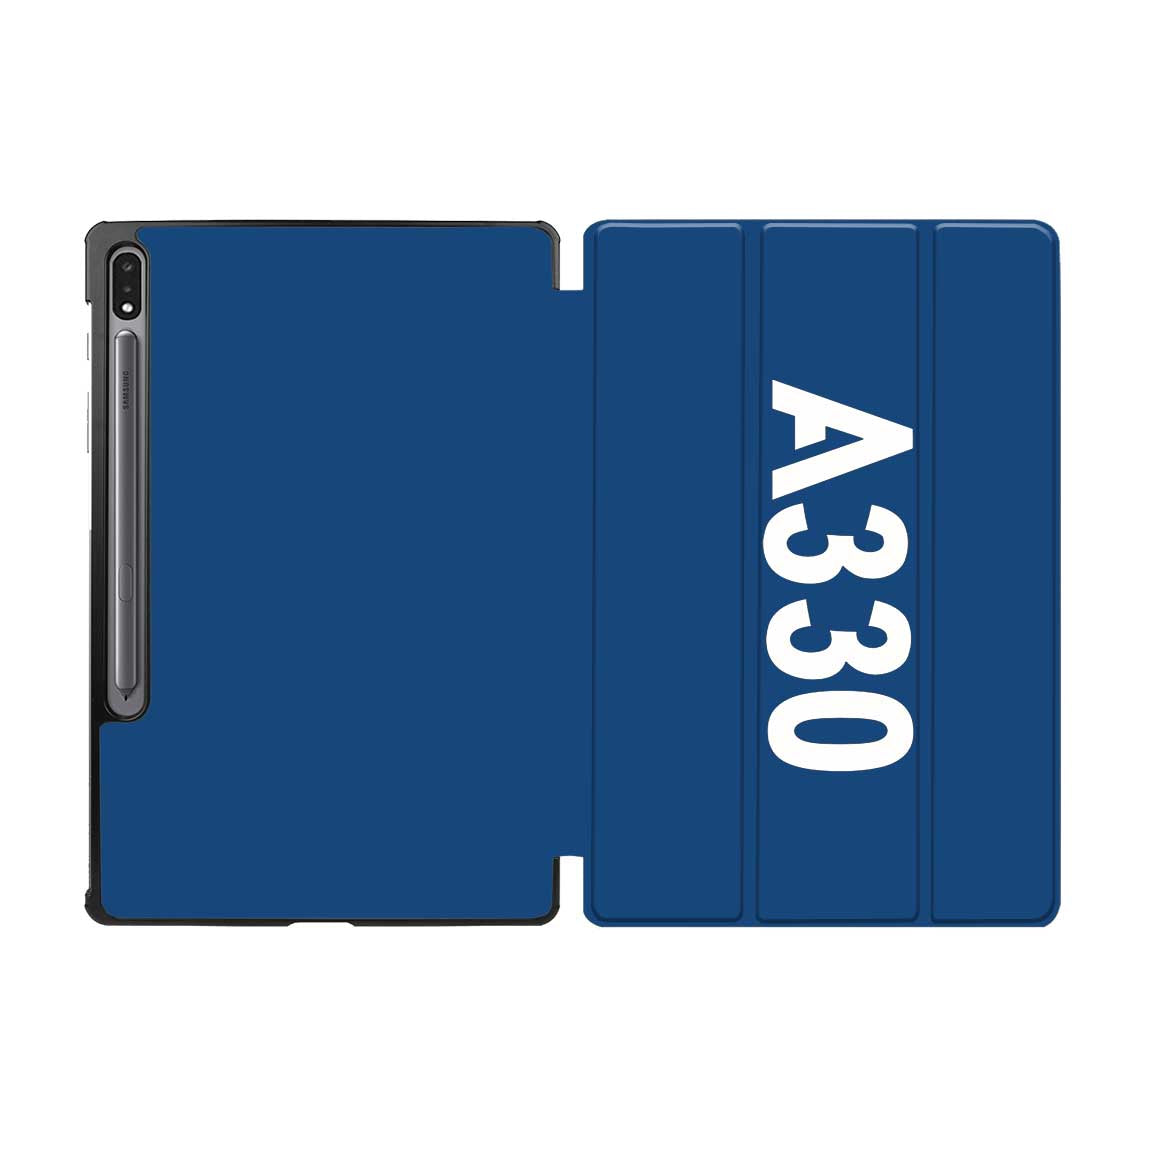 A330 Text Designed Samsung Tablet Cases